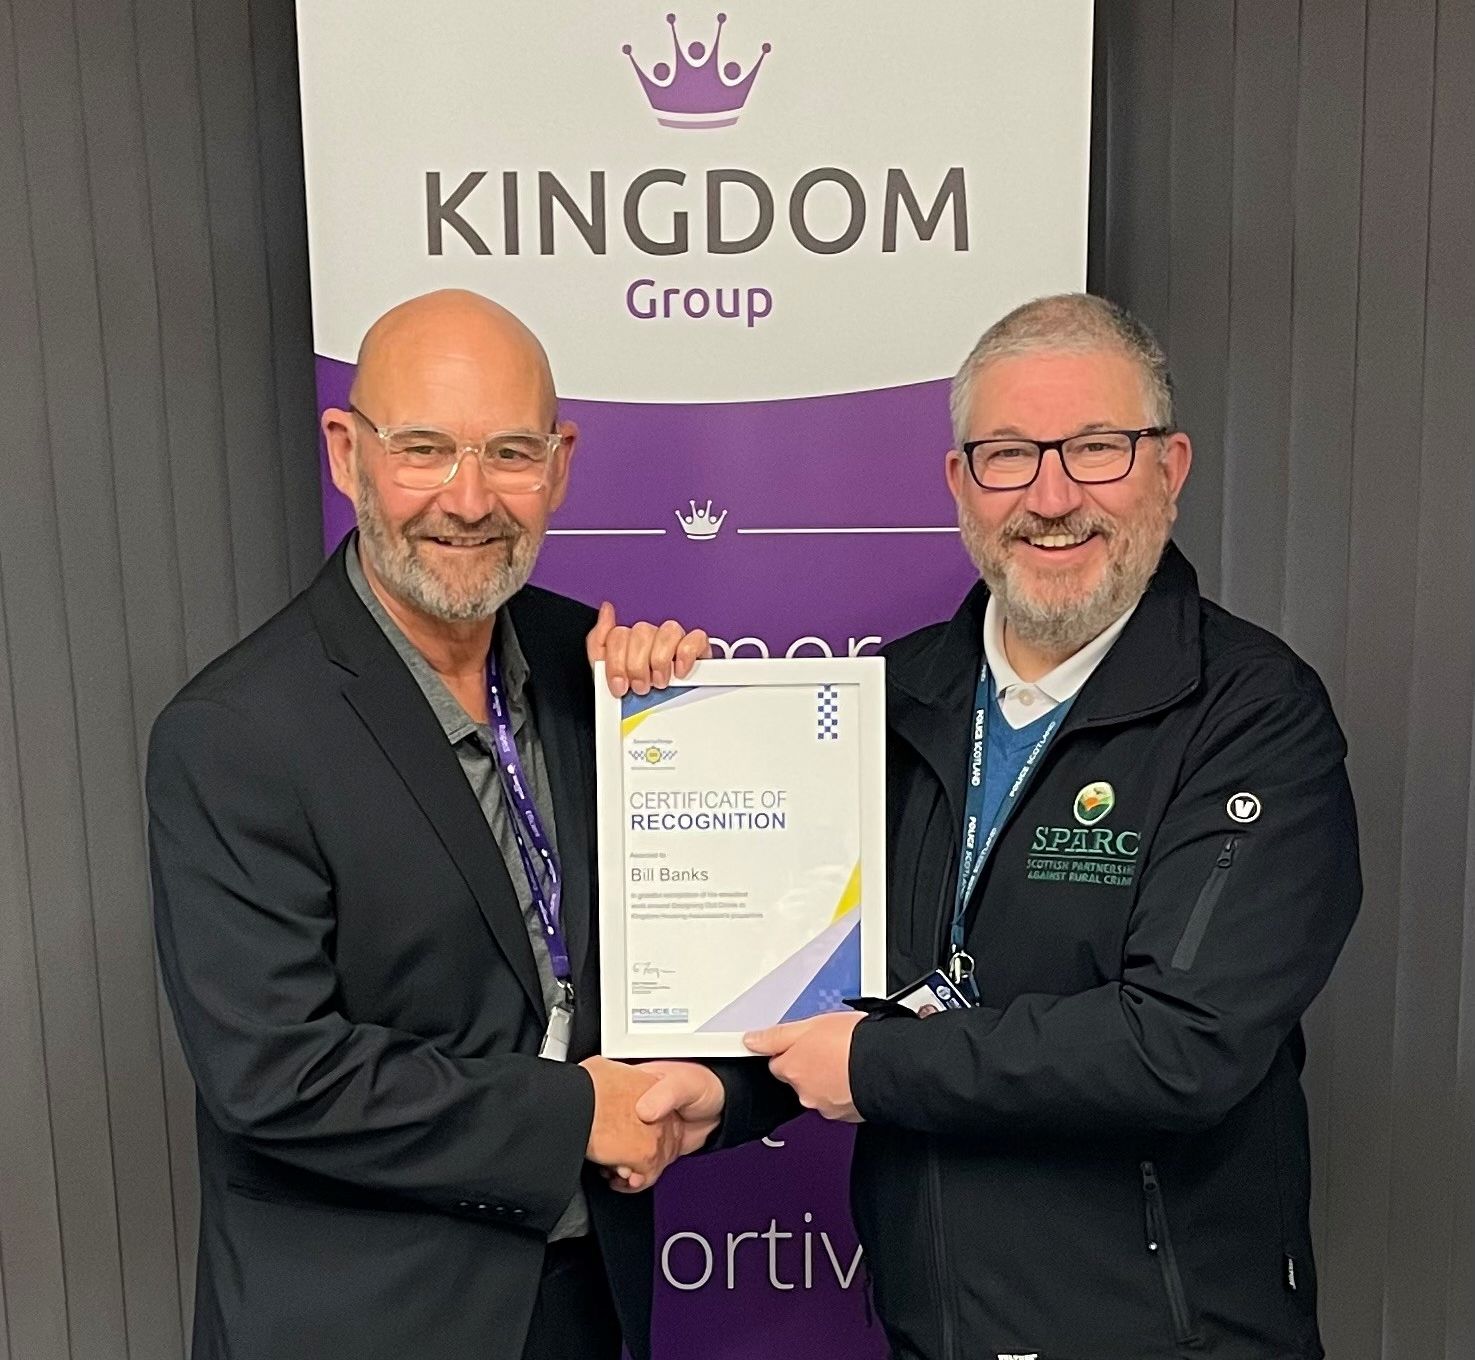 Kingdom Housing Association achievements recognised by Police Scotland